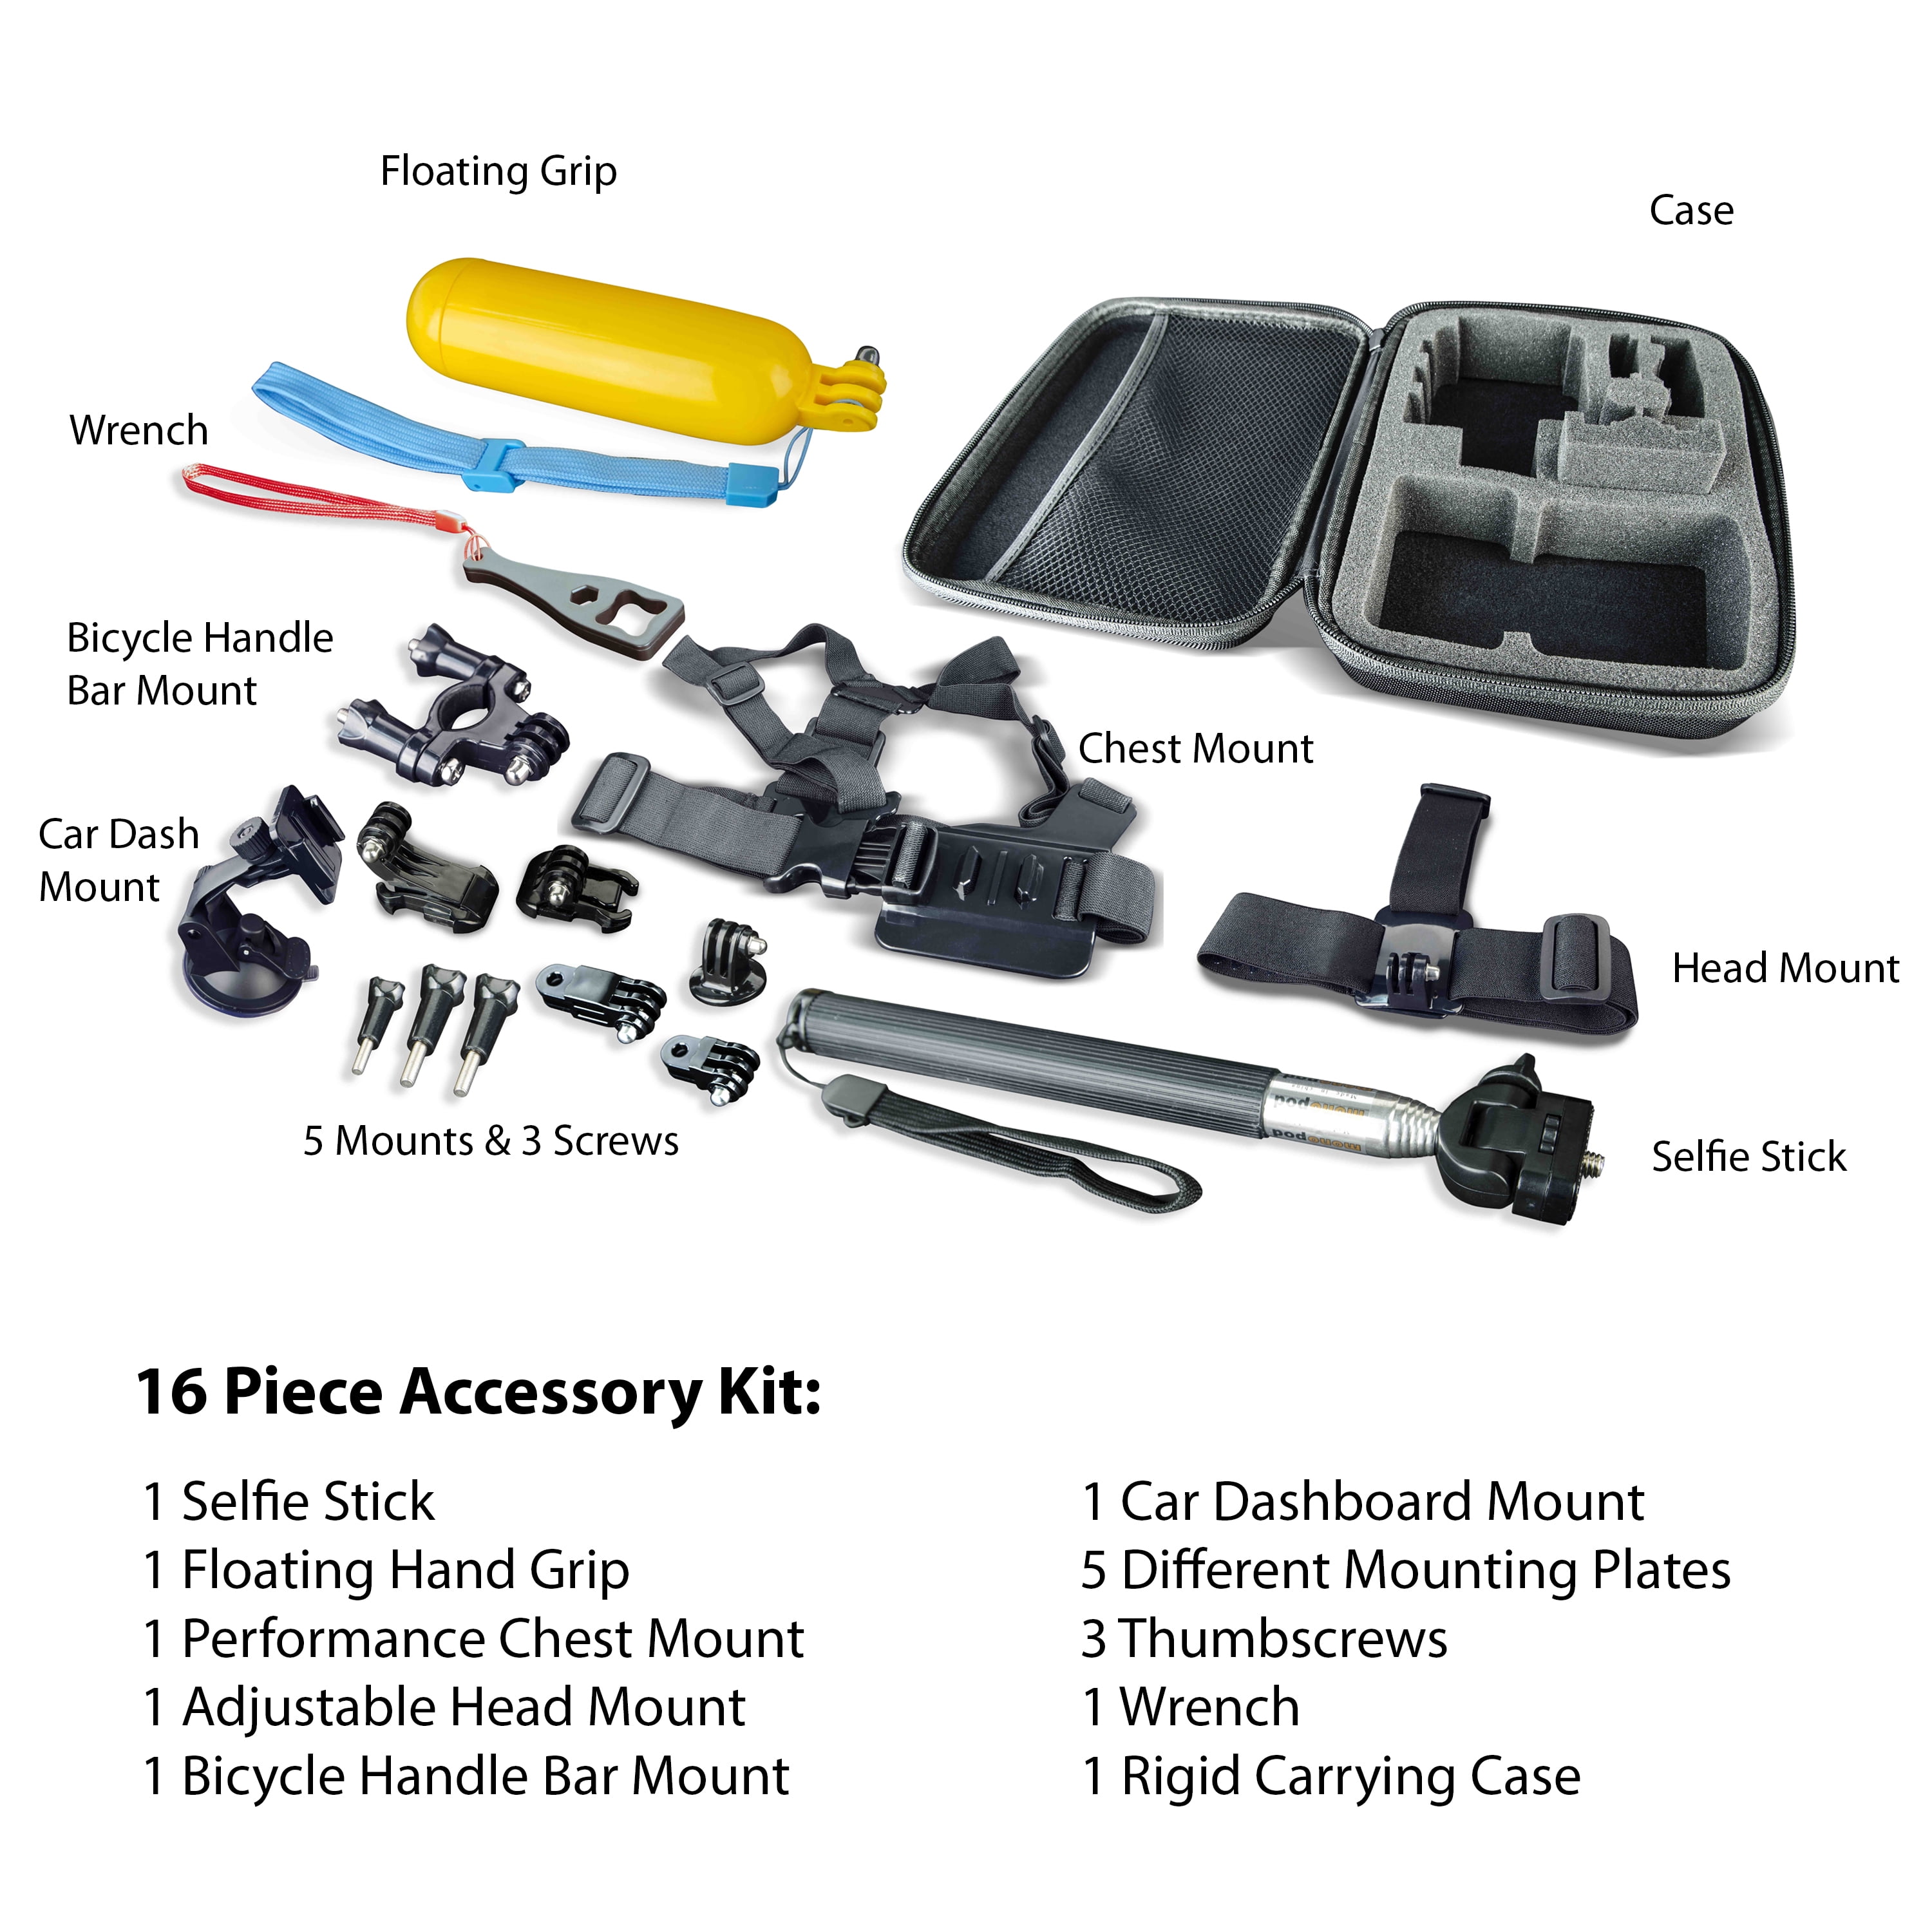 Action Camera Mounts & Accessories